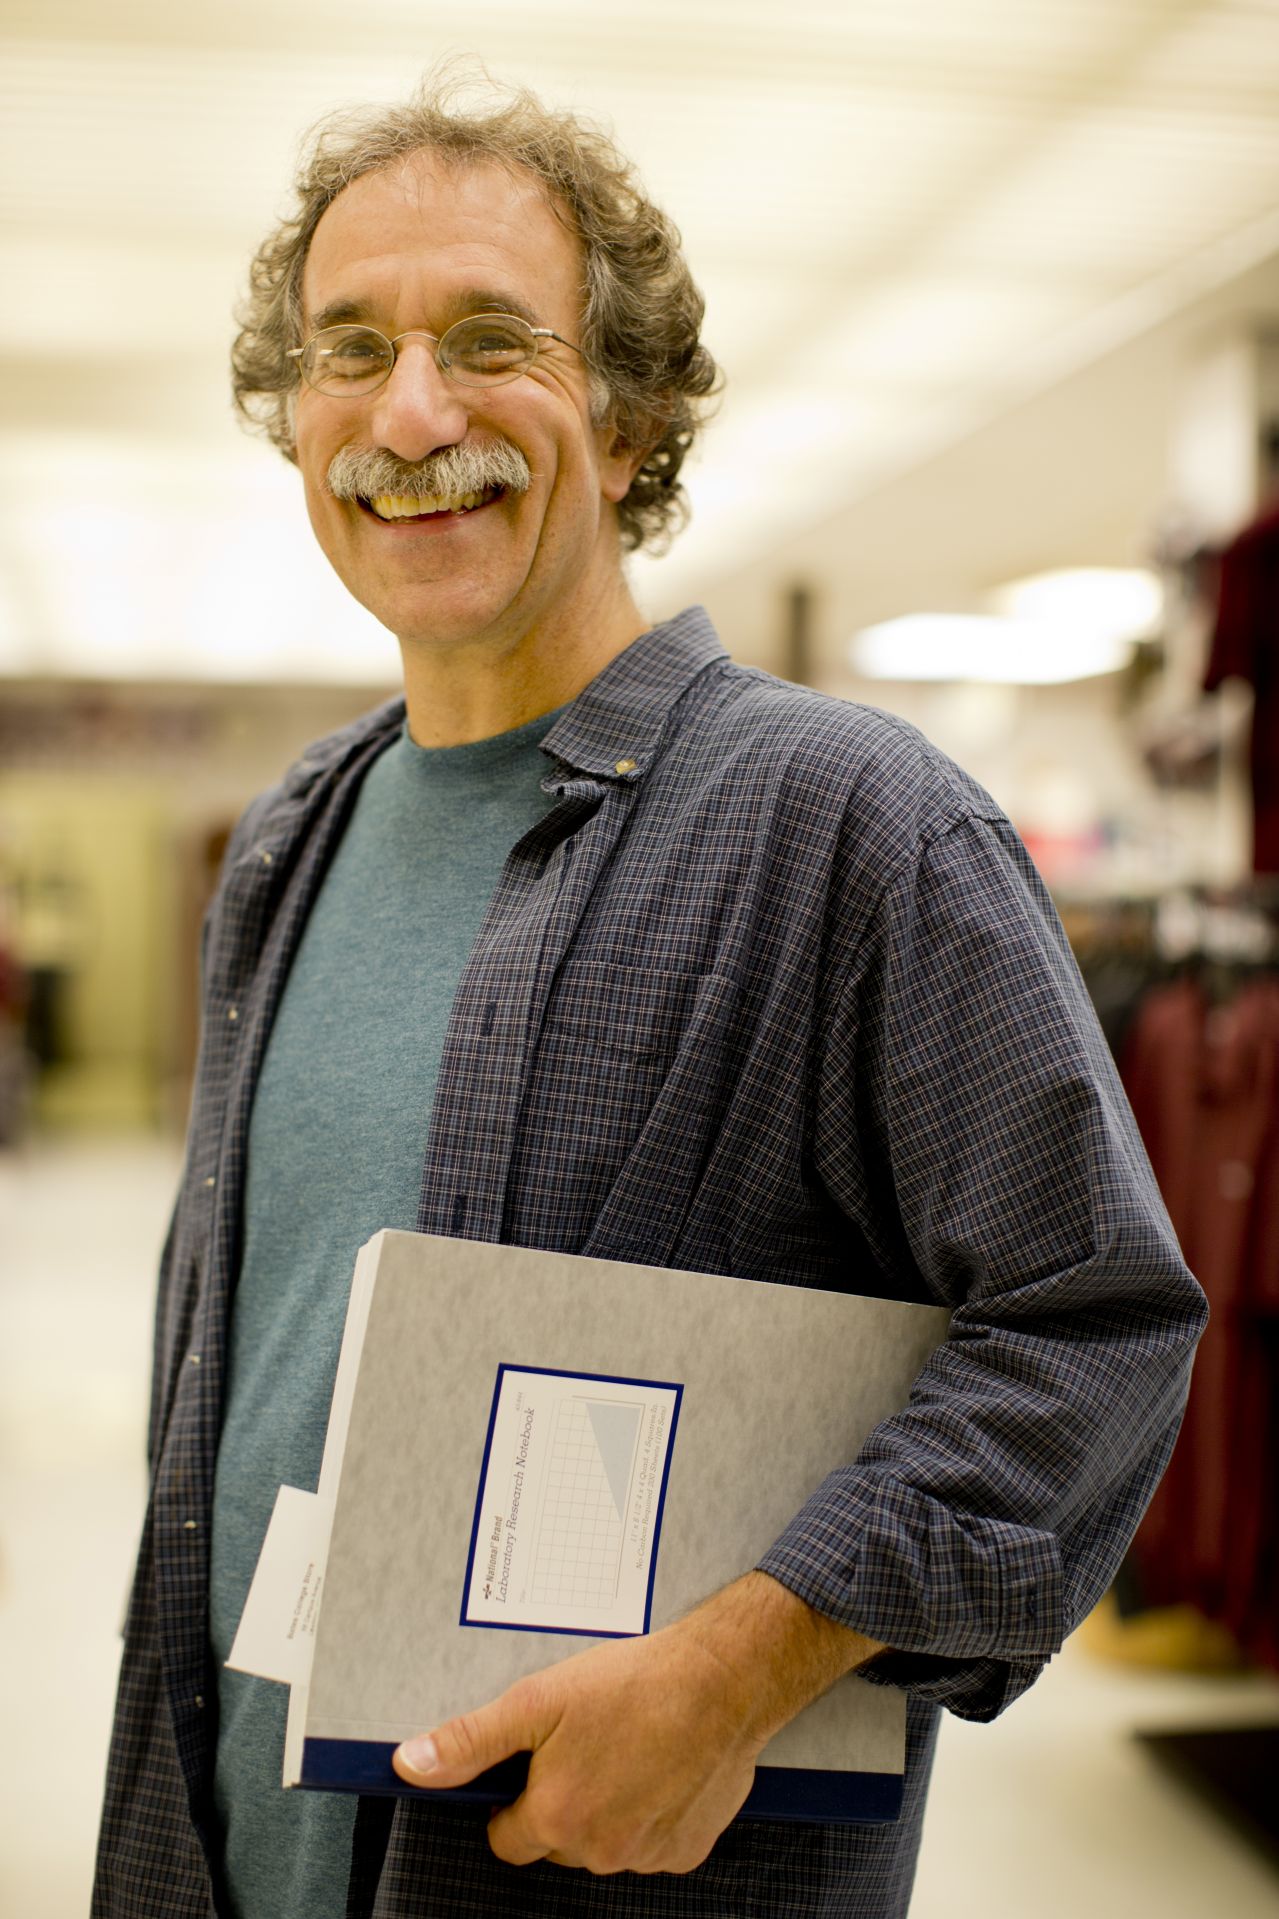 In his 33rd year at Bates, Tom Wenzel, Charles A. Dana Professor of Chemistry, stopped by the Bates College Store to buy a couple of laboratory notebooks for two seniors who will  do research with him this academic year. "We do research on trying to distinguish molecules that have the property of your left and right hands, that they're mirror images of each other," he says. He has been doing research on this area for almost 25 years. What's in it for him? He cites two things. One is that many pharmaceutical compounds have this property, and it's critically important to be able to distinguish them from each other. So the work we do has great significance to drug development. The other part is just the fantastic educational experience for the students working on these research projects because of their independent nature."